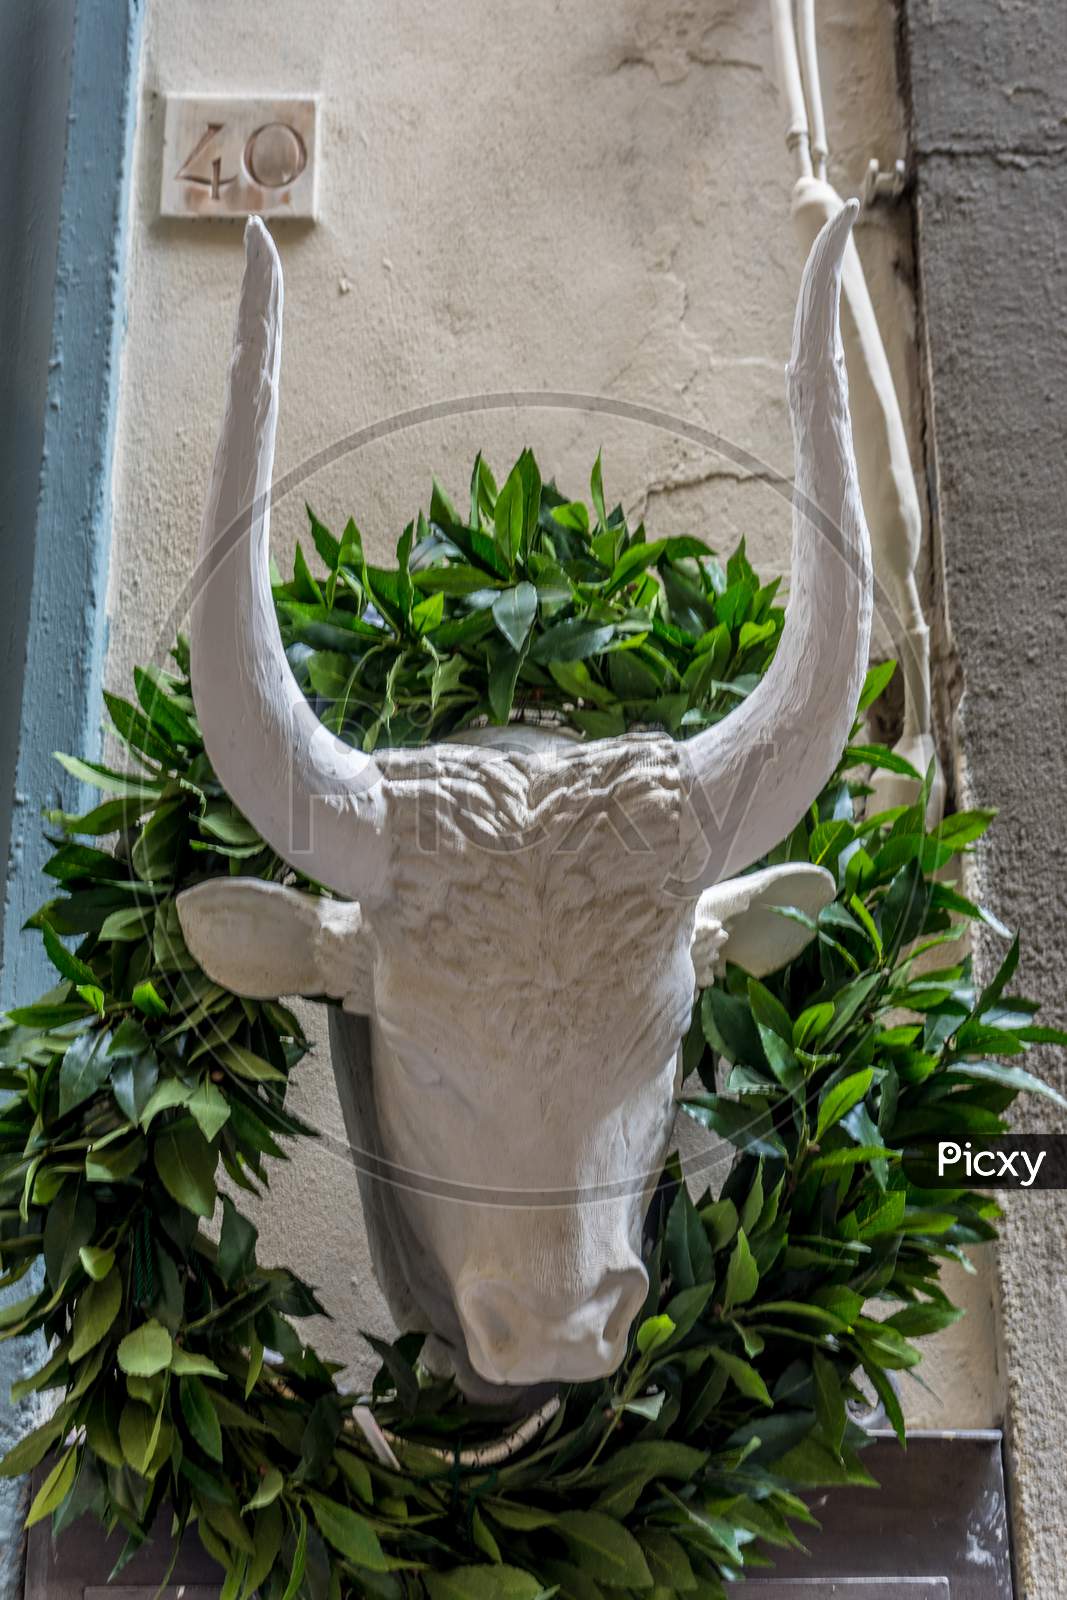 Italy,Florence, A Close Up Of A Flower Pot